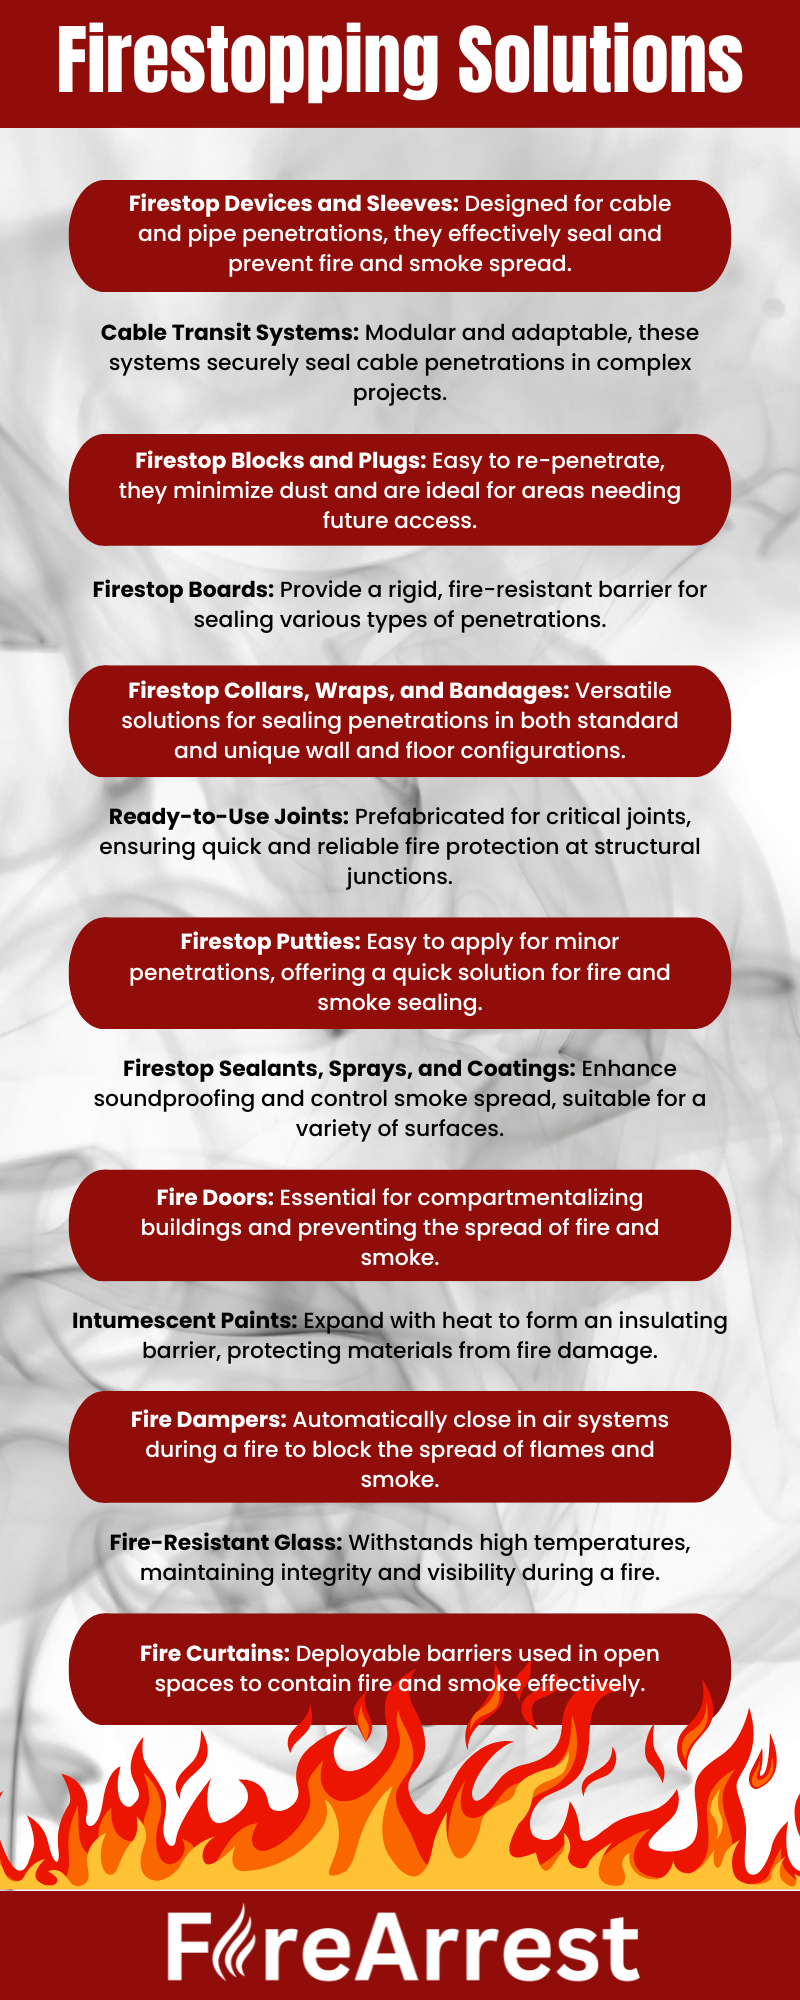 Firestopping Solutions Infographic